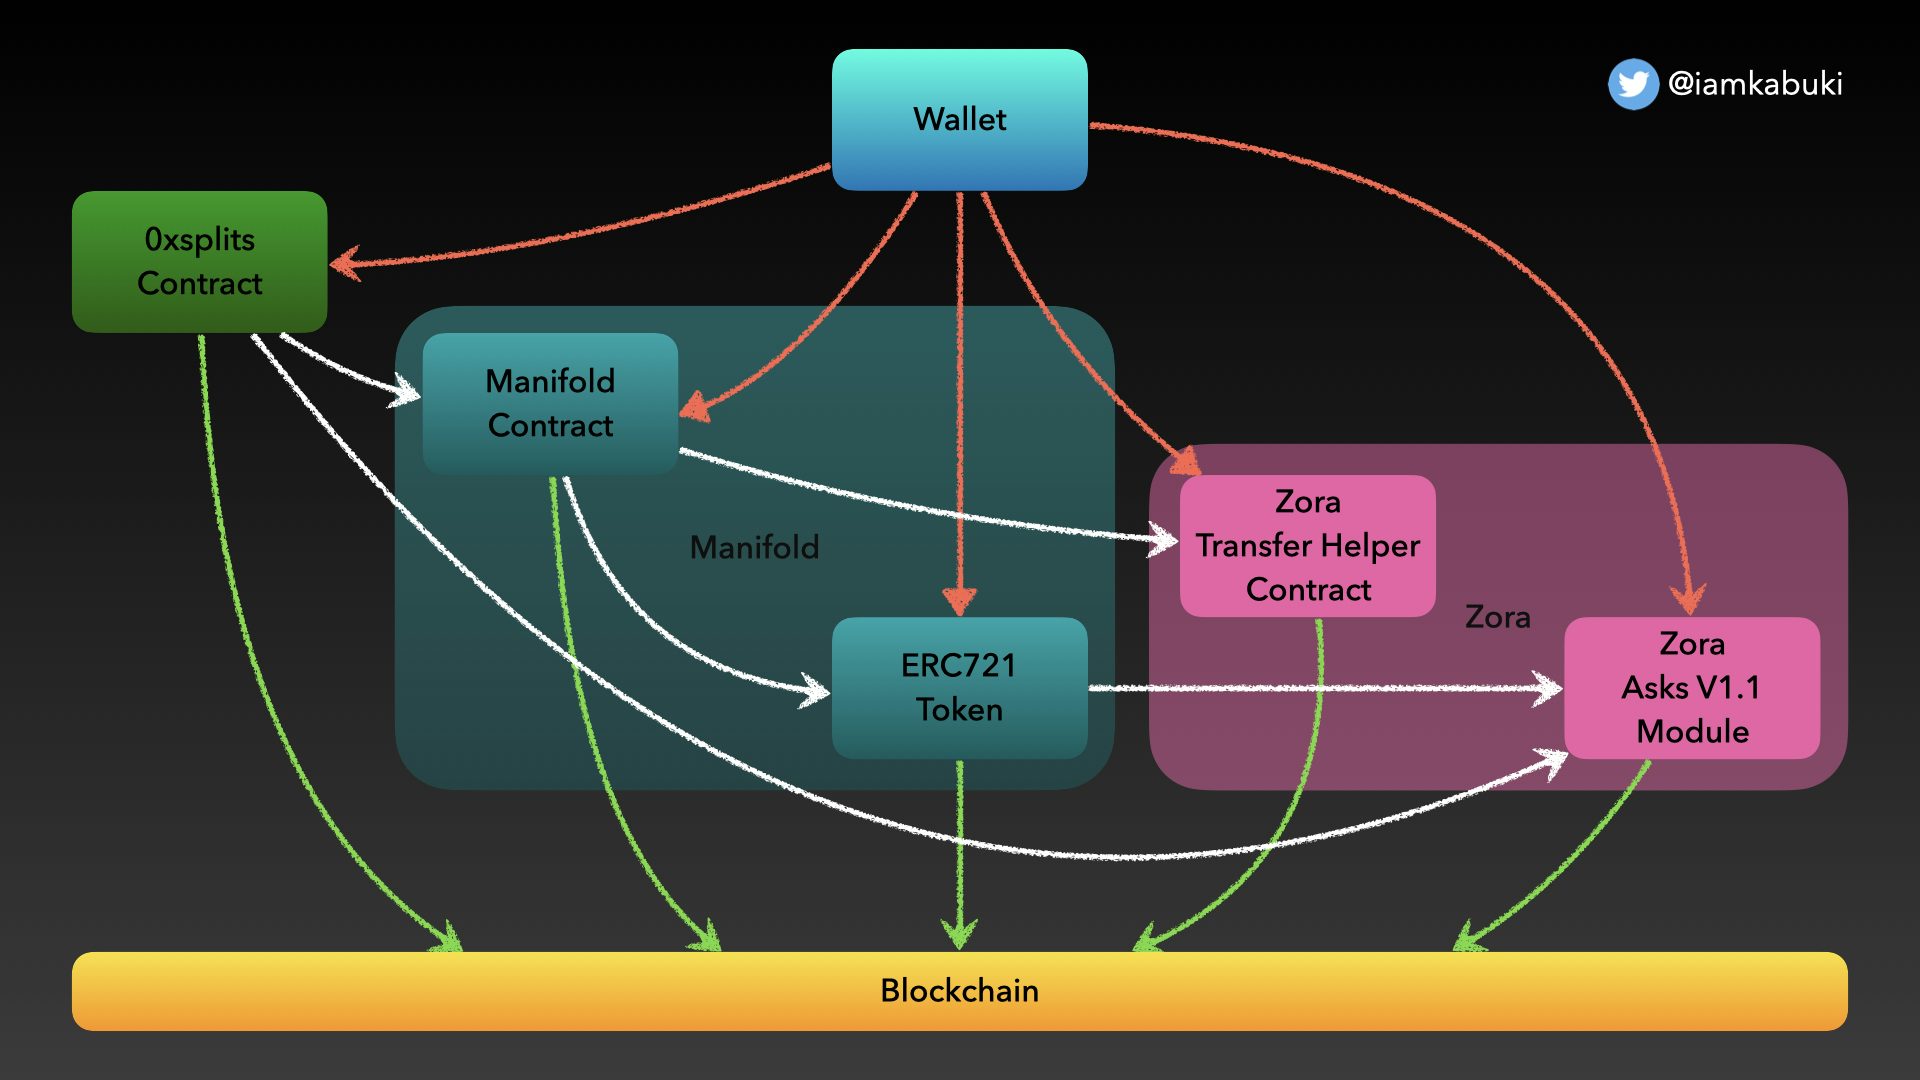 Relationships between the different contracts, modules, the token and the wallet